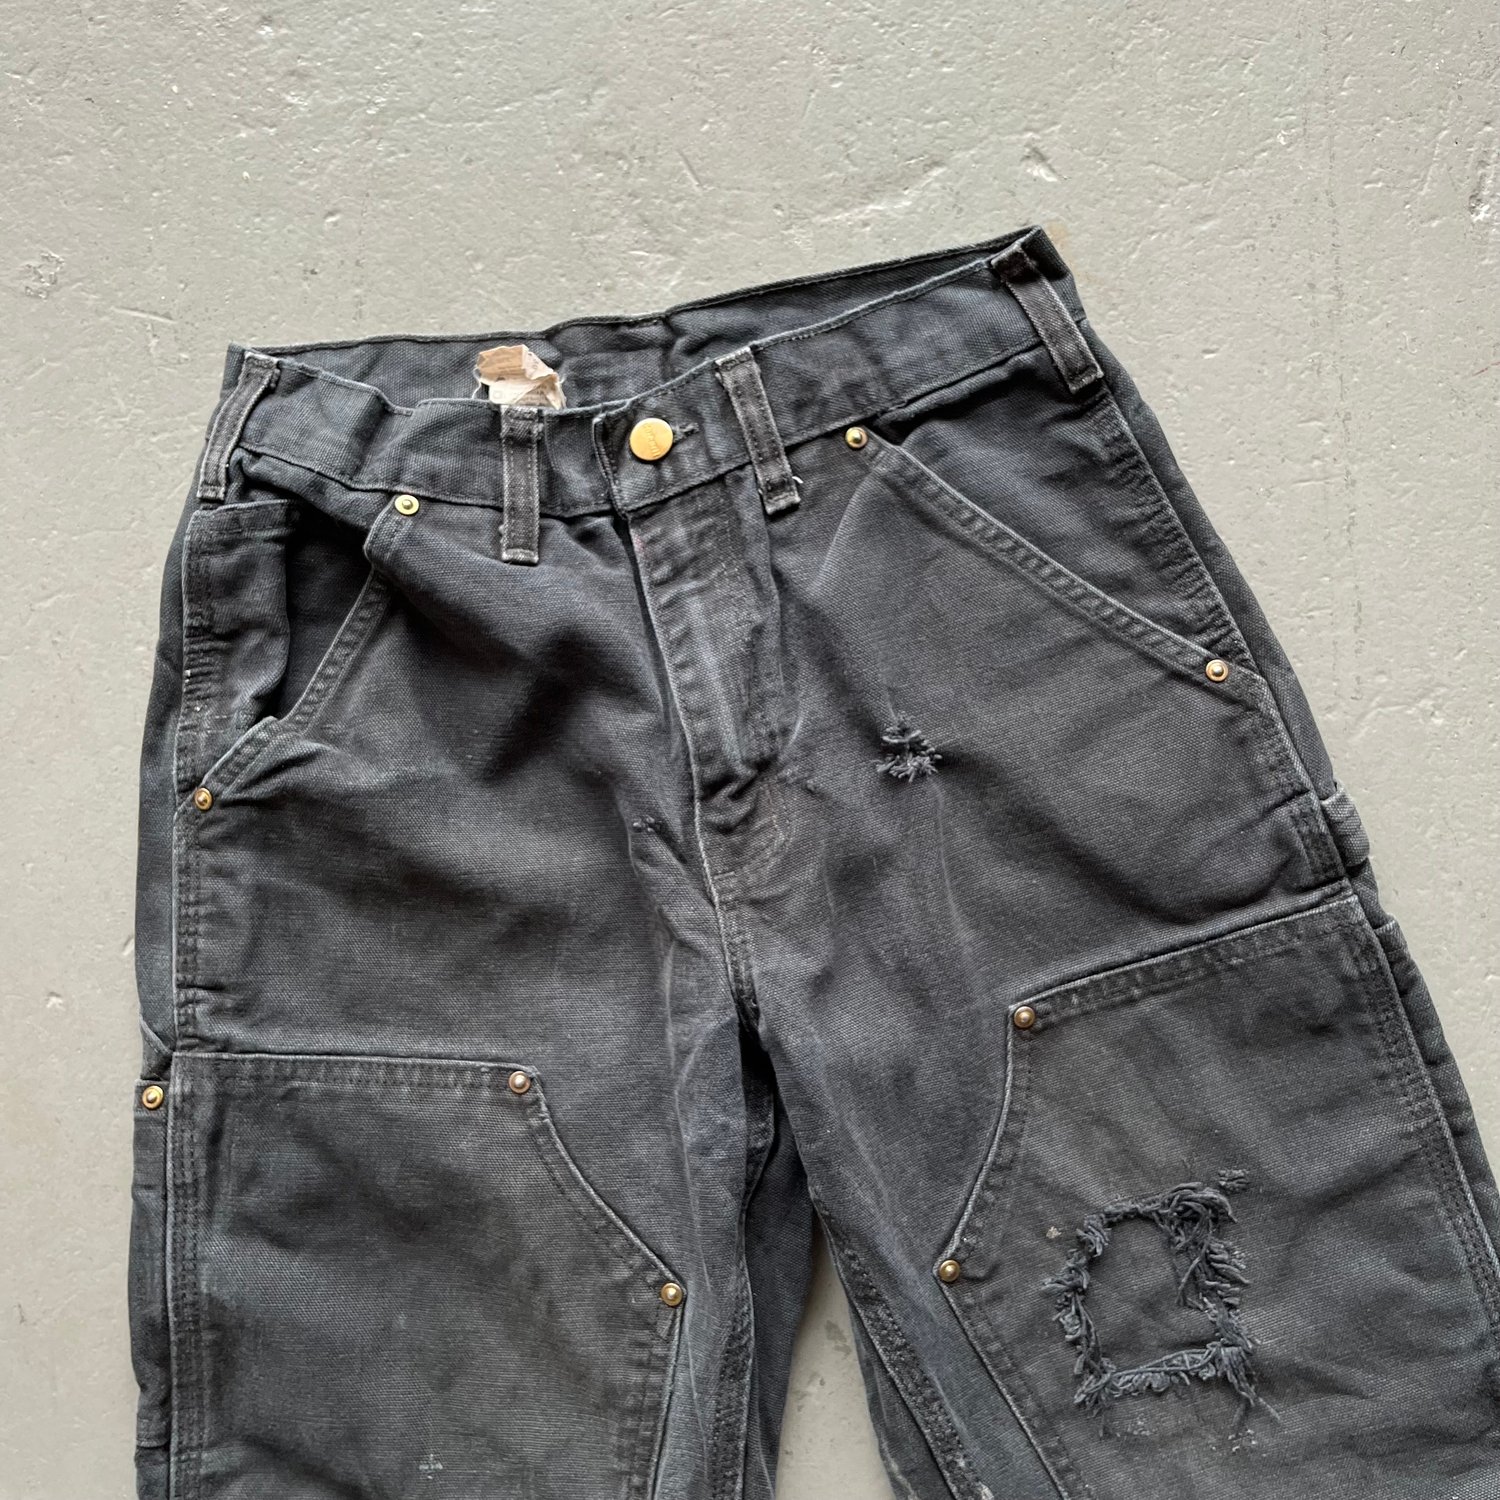 Image of Vintage Carhartt thrashed double knee jeans size 28/30